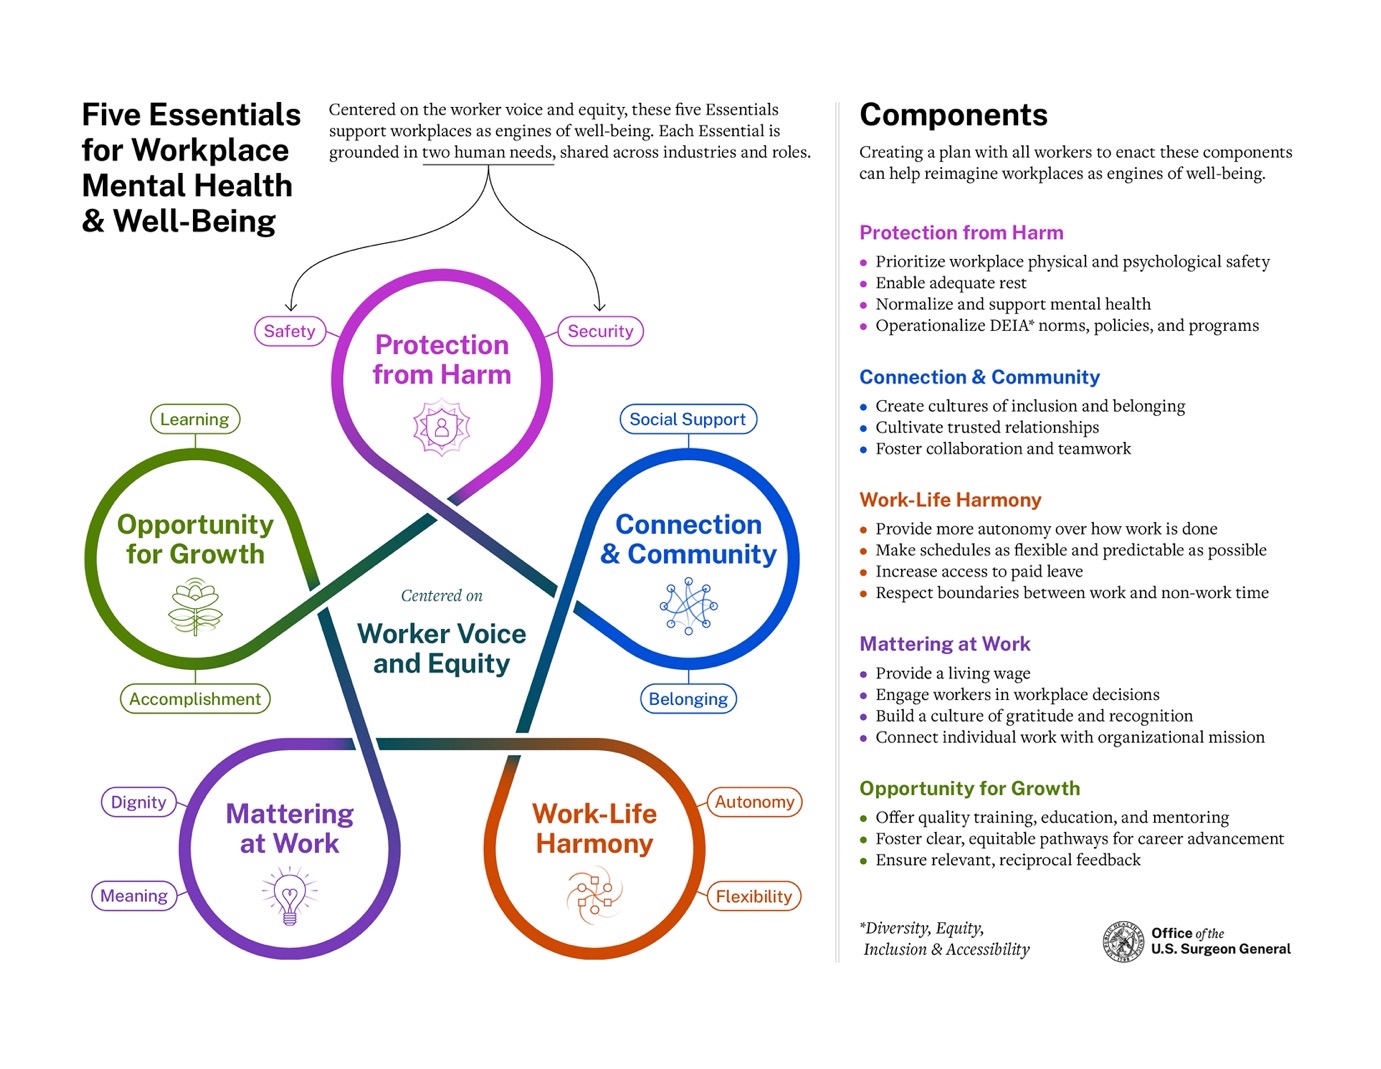 The U.S Surgeon General’s Framework for Workplace Mental Health and Wellbeing